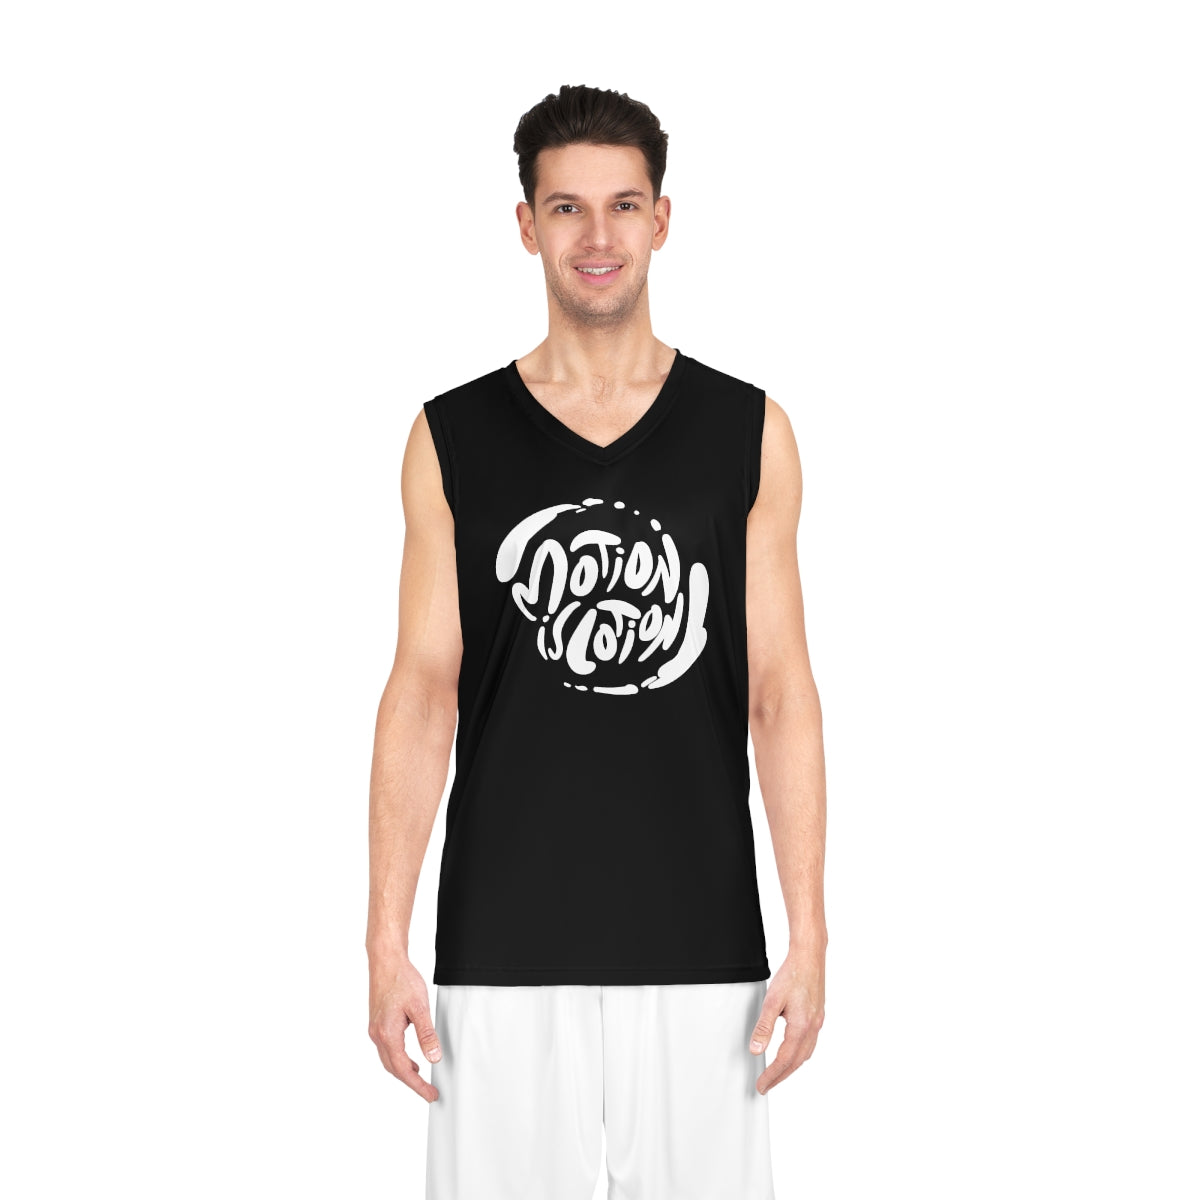 Motion Is Lotion Basketball Jersey - Black